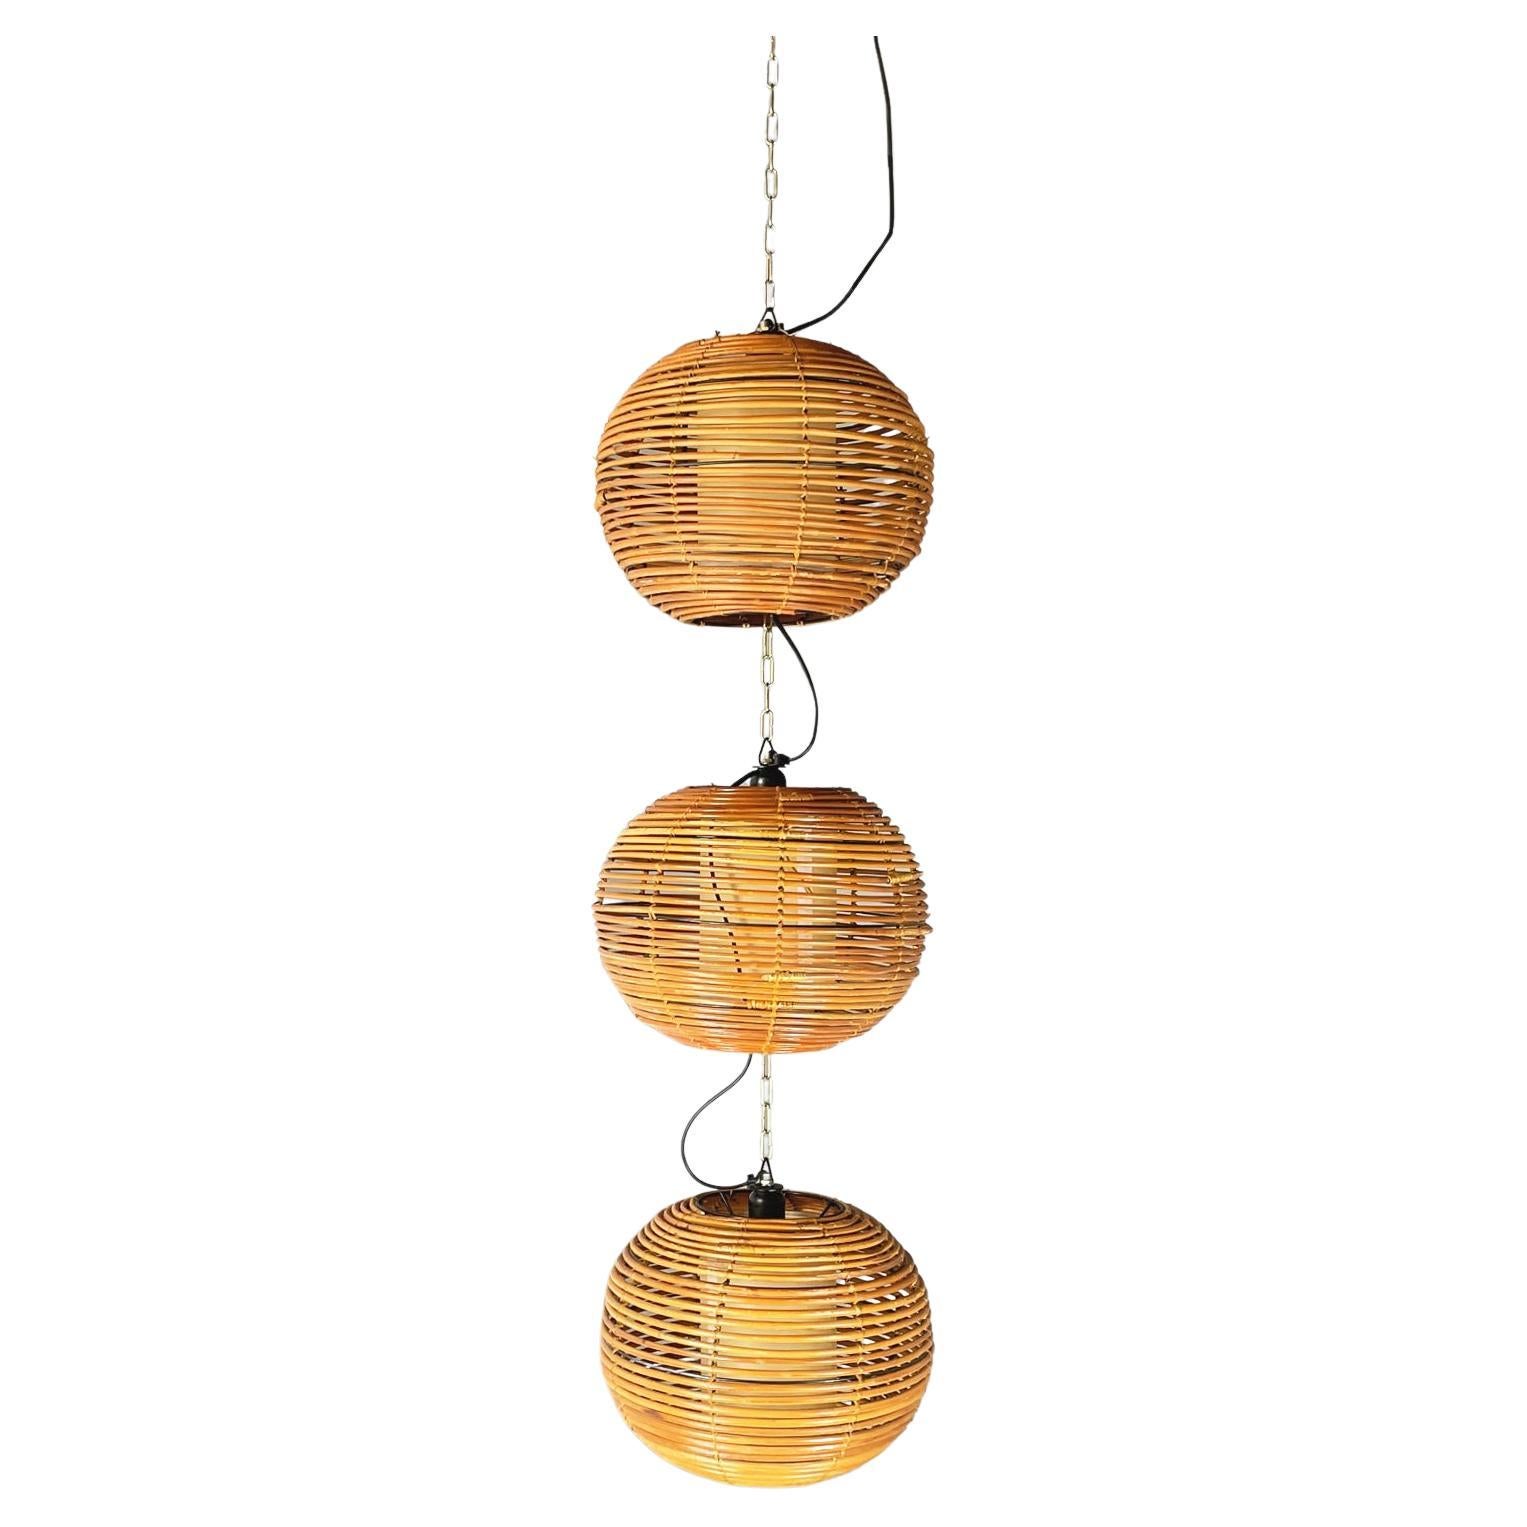 Italian Mid-Century Modern Rattan Chandelier with 3 Spherical Lampshade, 1960s For Sale